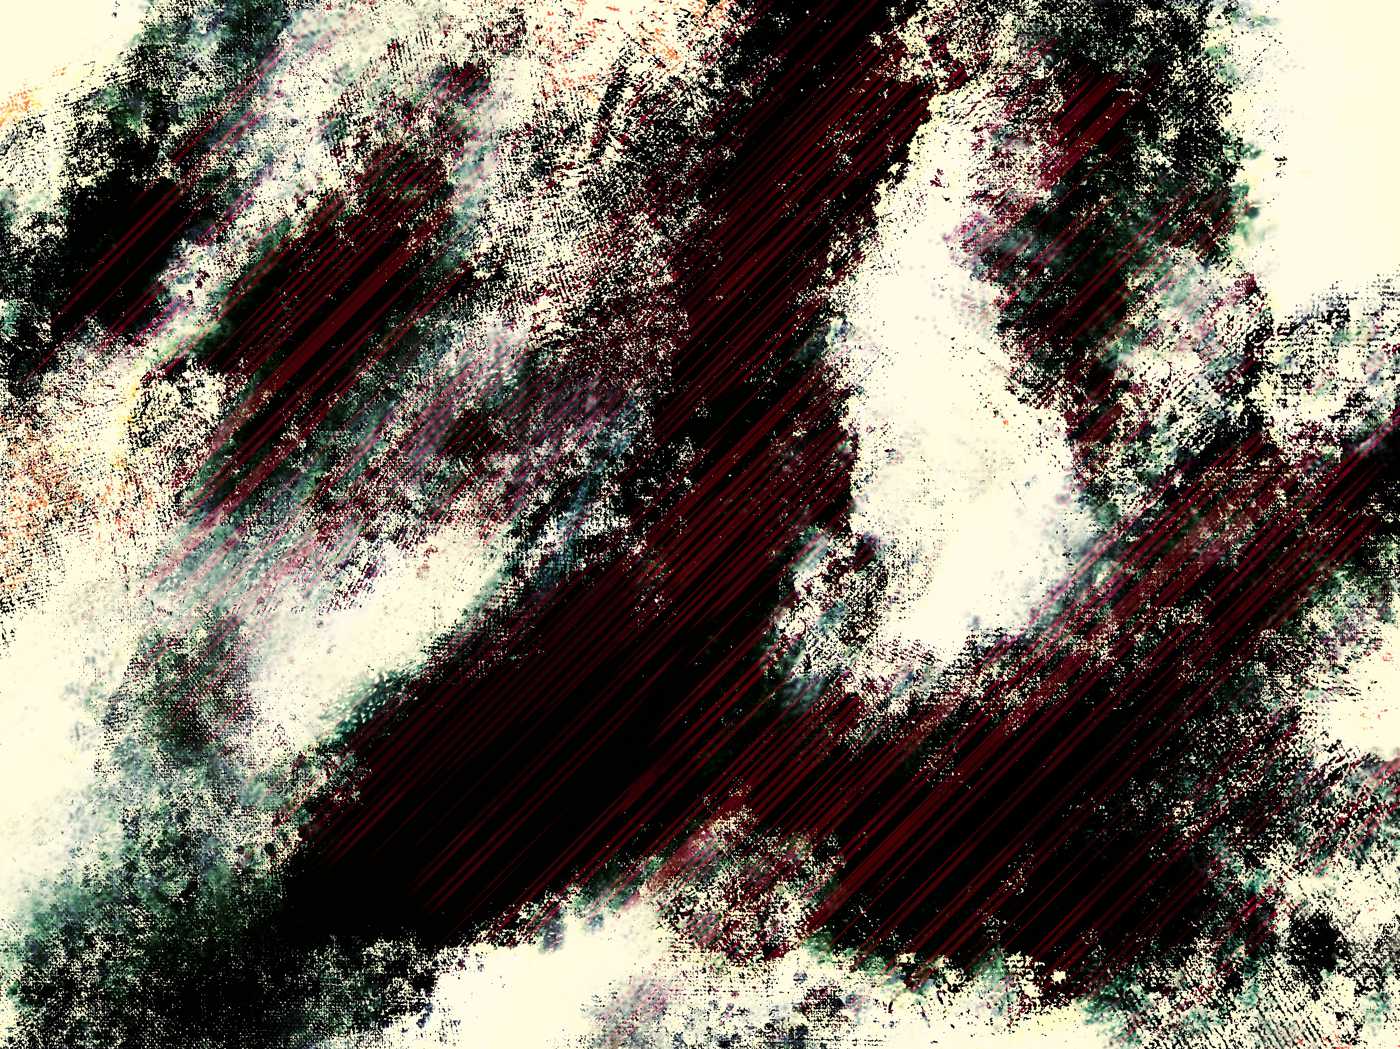 Abstract painting, broken white surface dissolving into a black background with an irregular pattern of thin red lines, edges of the surface are distorted and blurred into various colors.